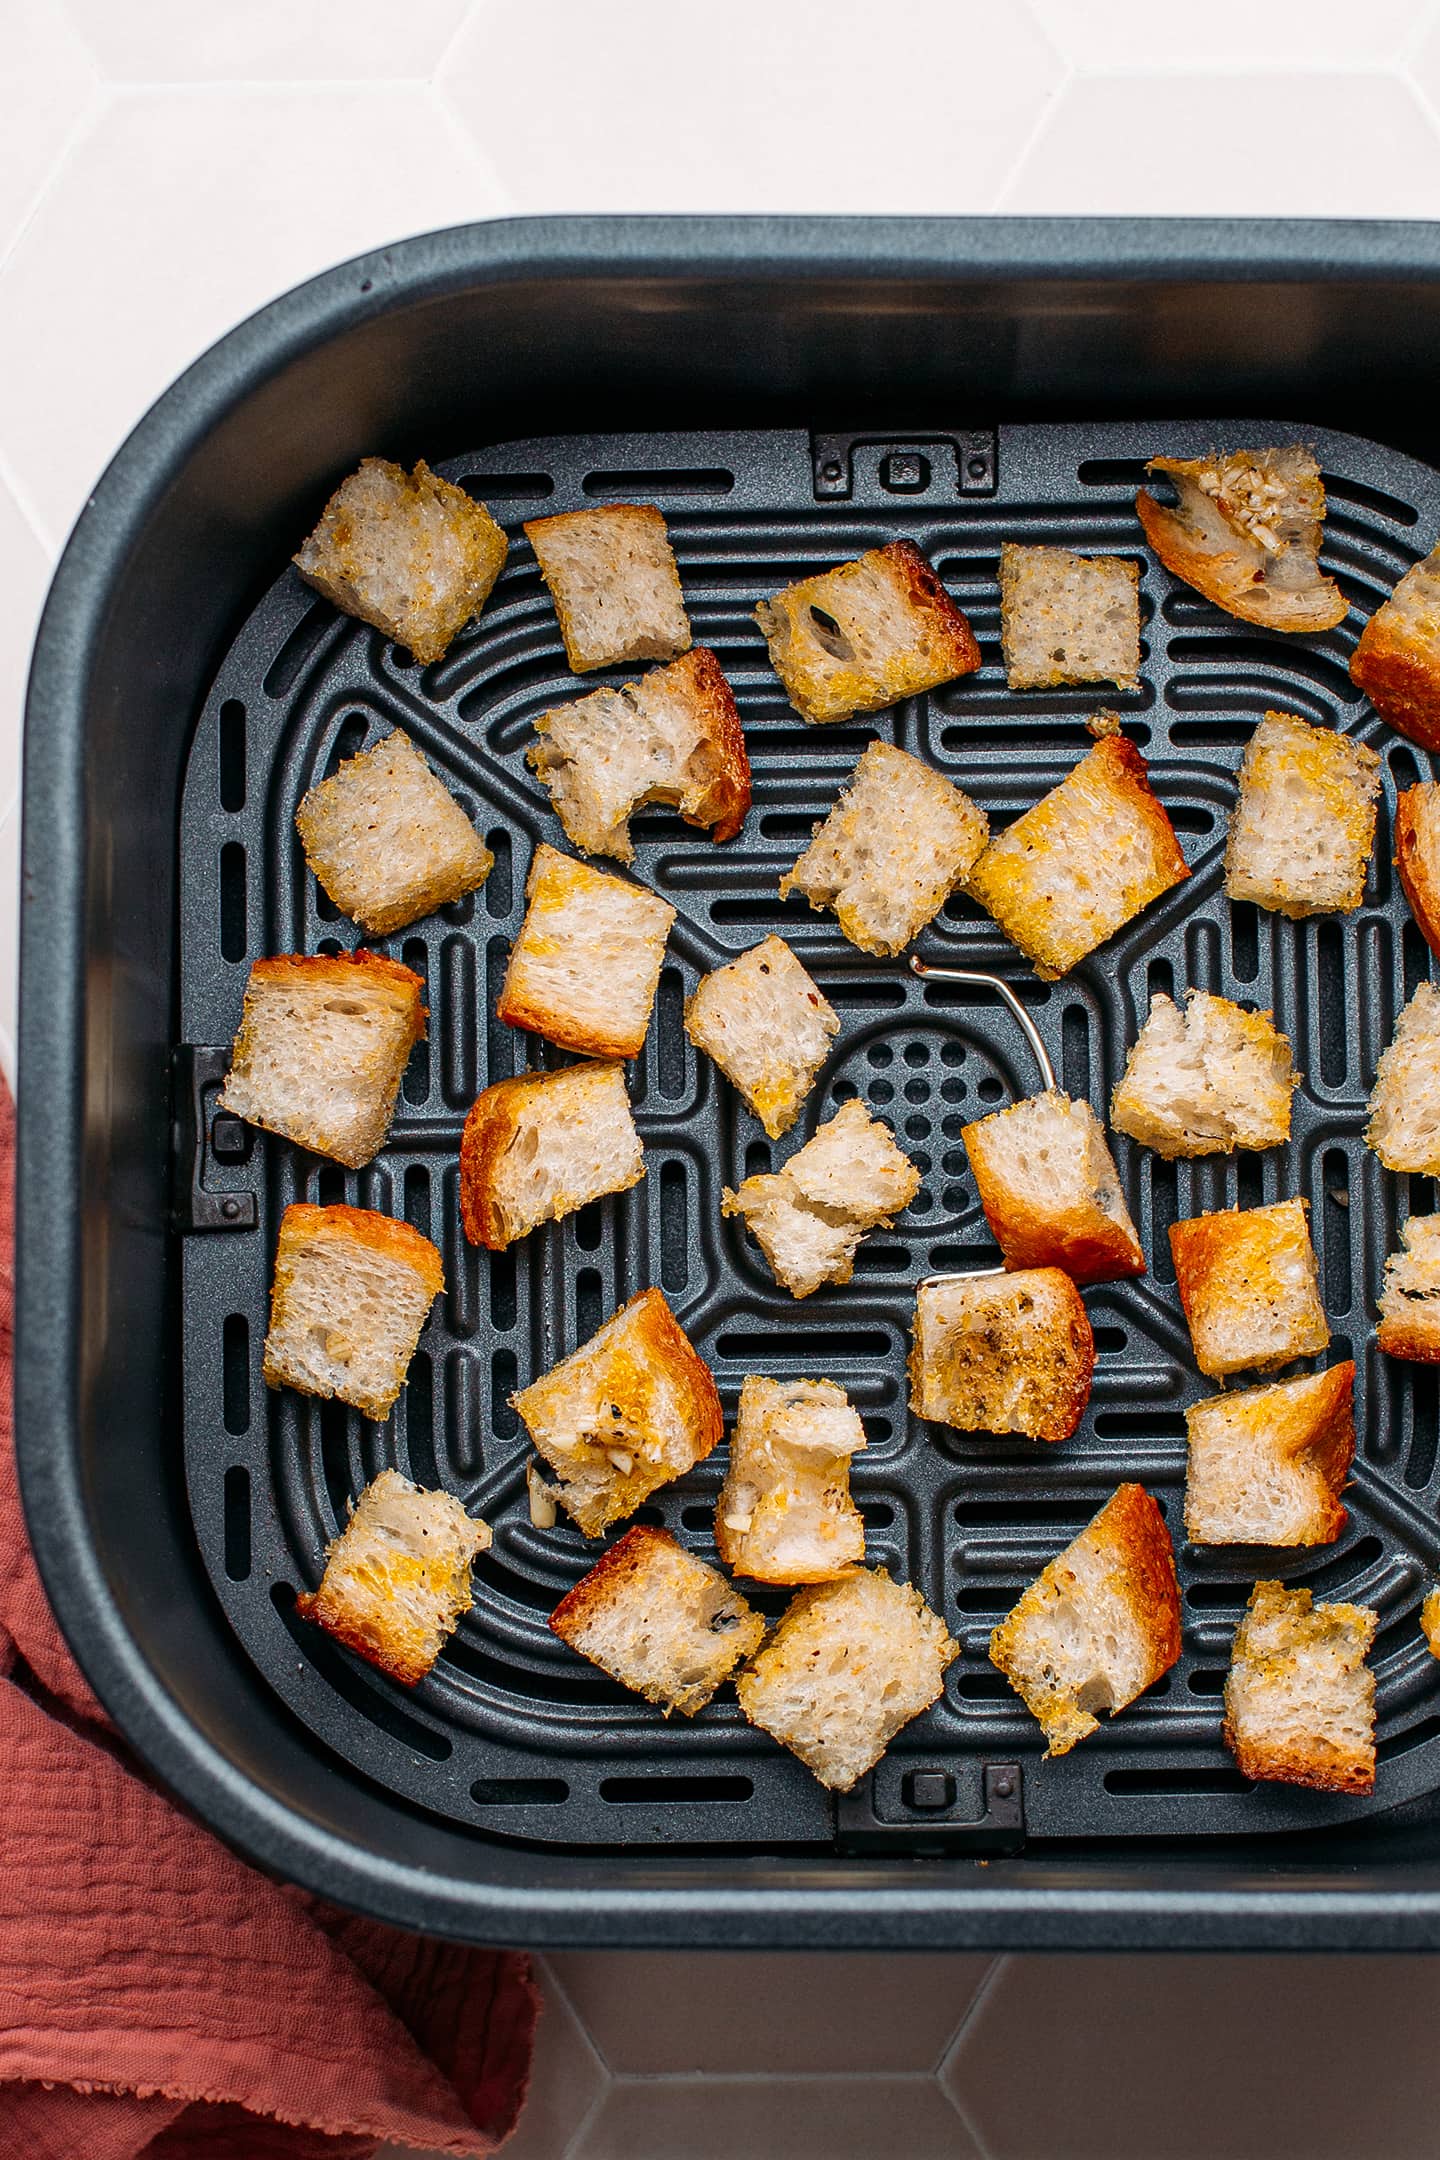 Uncooked croutons in the basket of an air fryer.